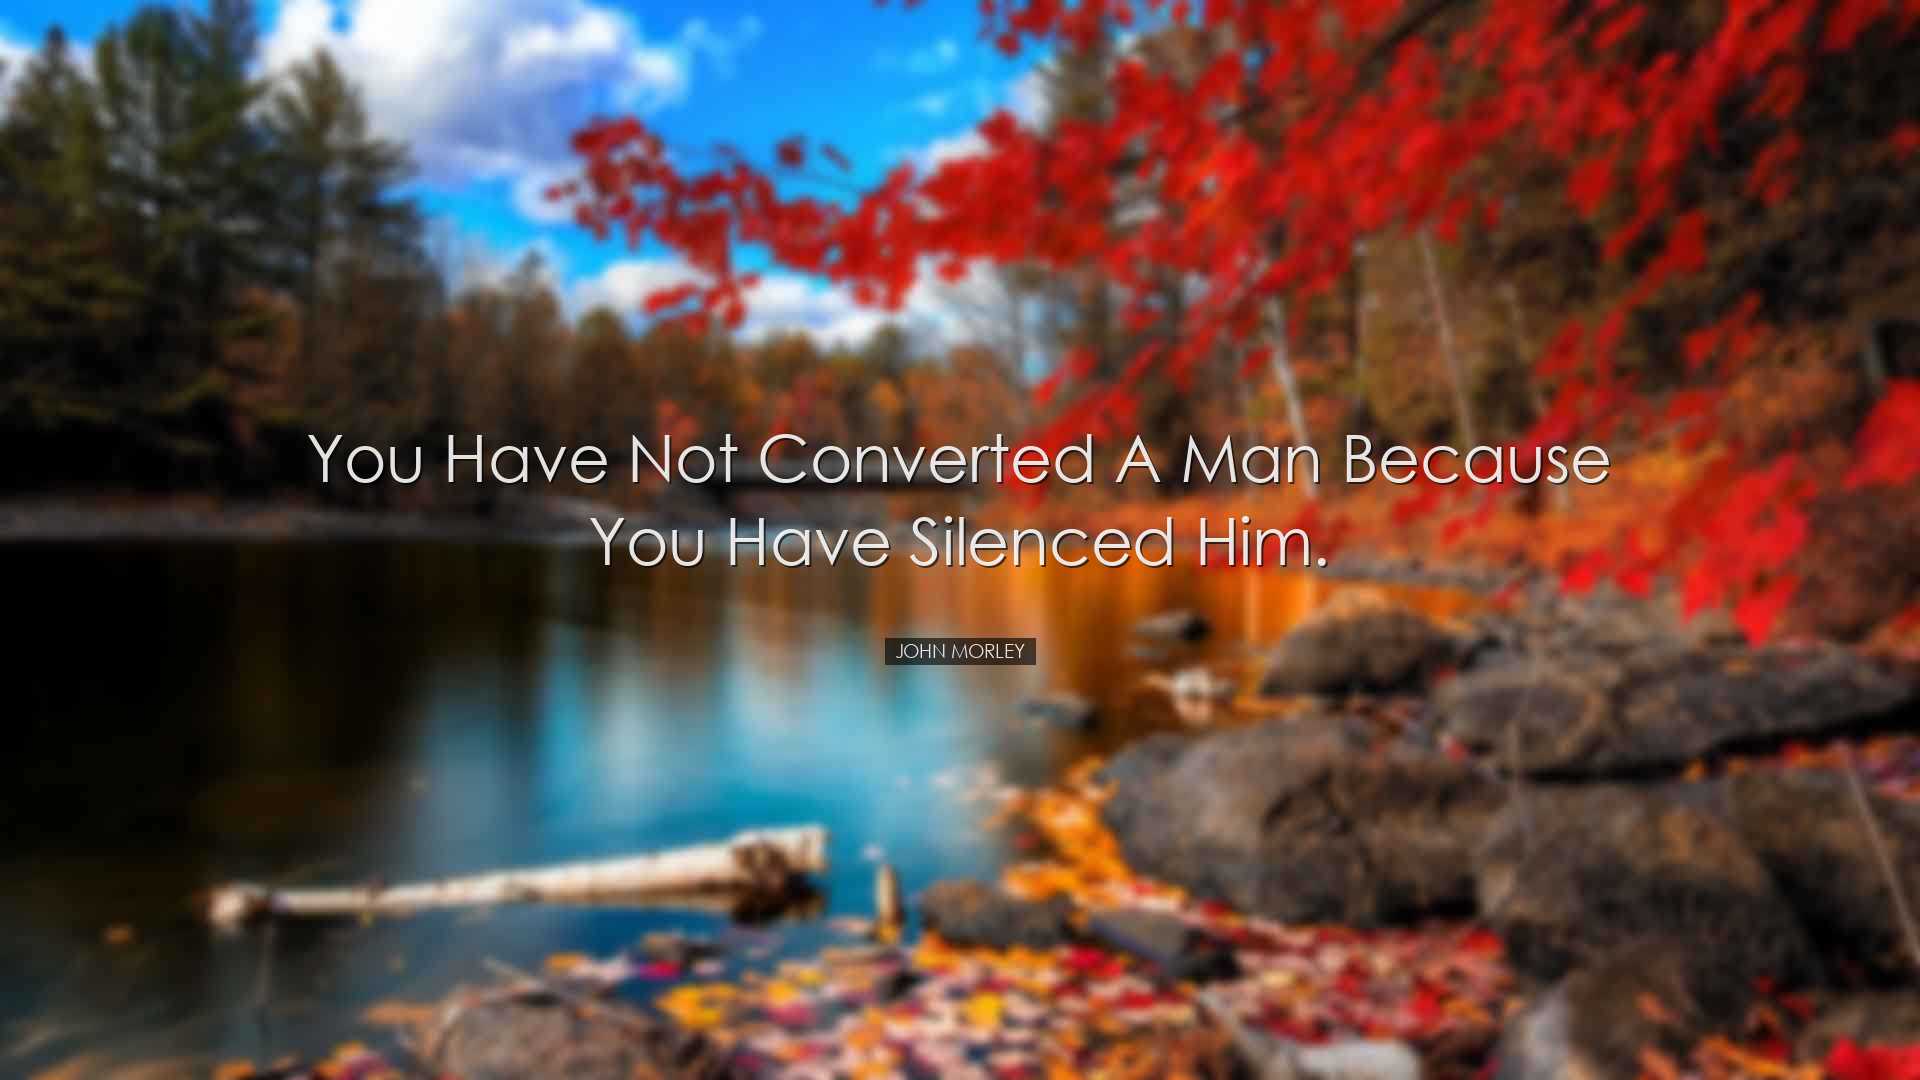 You have not converted a man because you have silenced him. - John